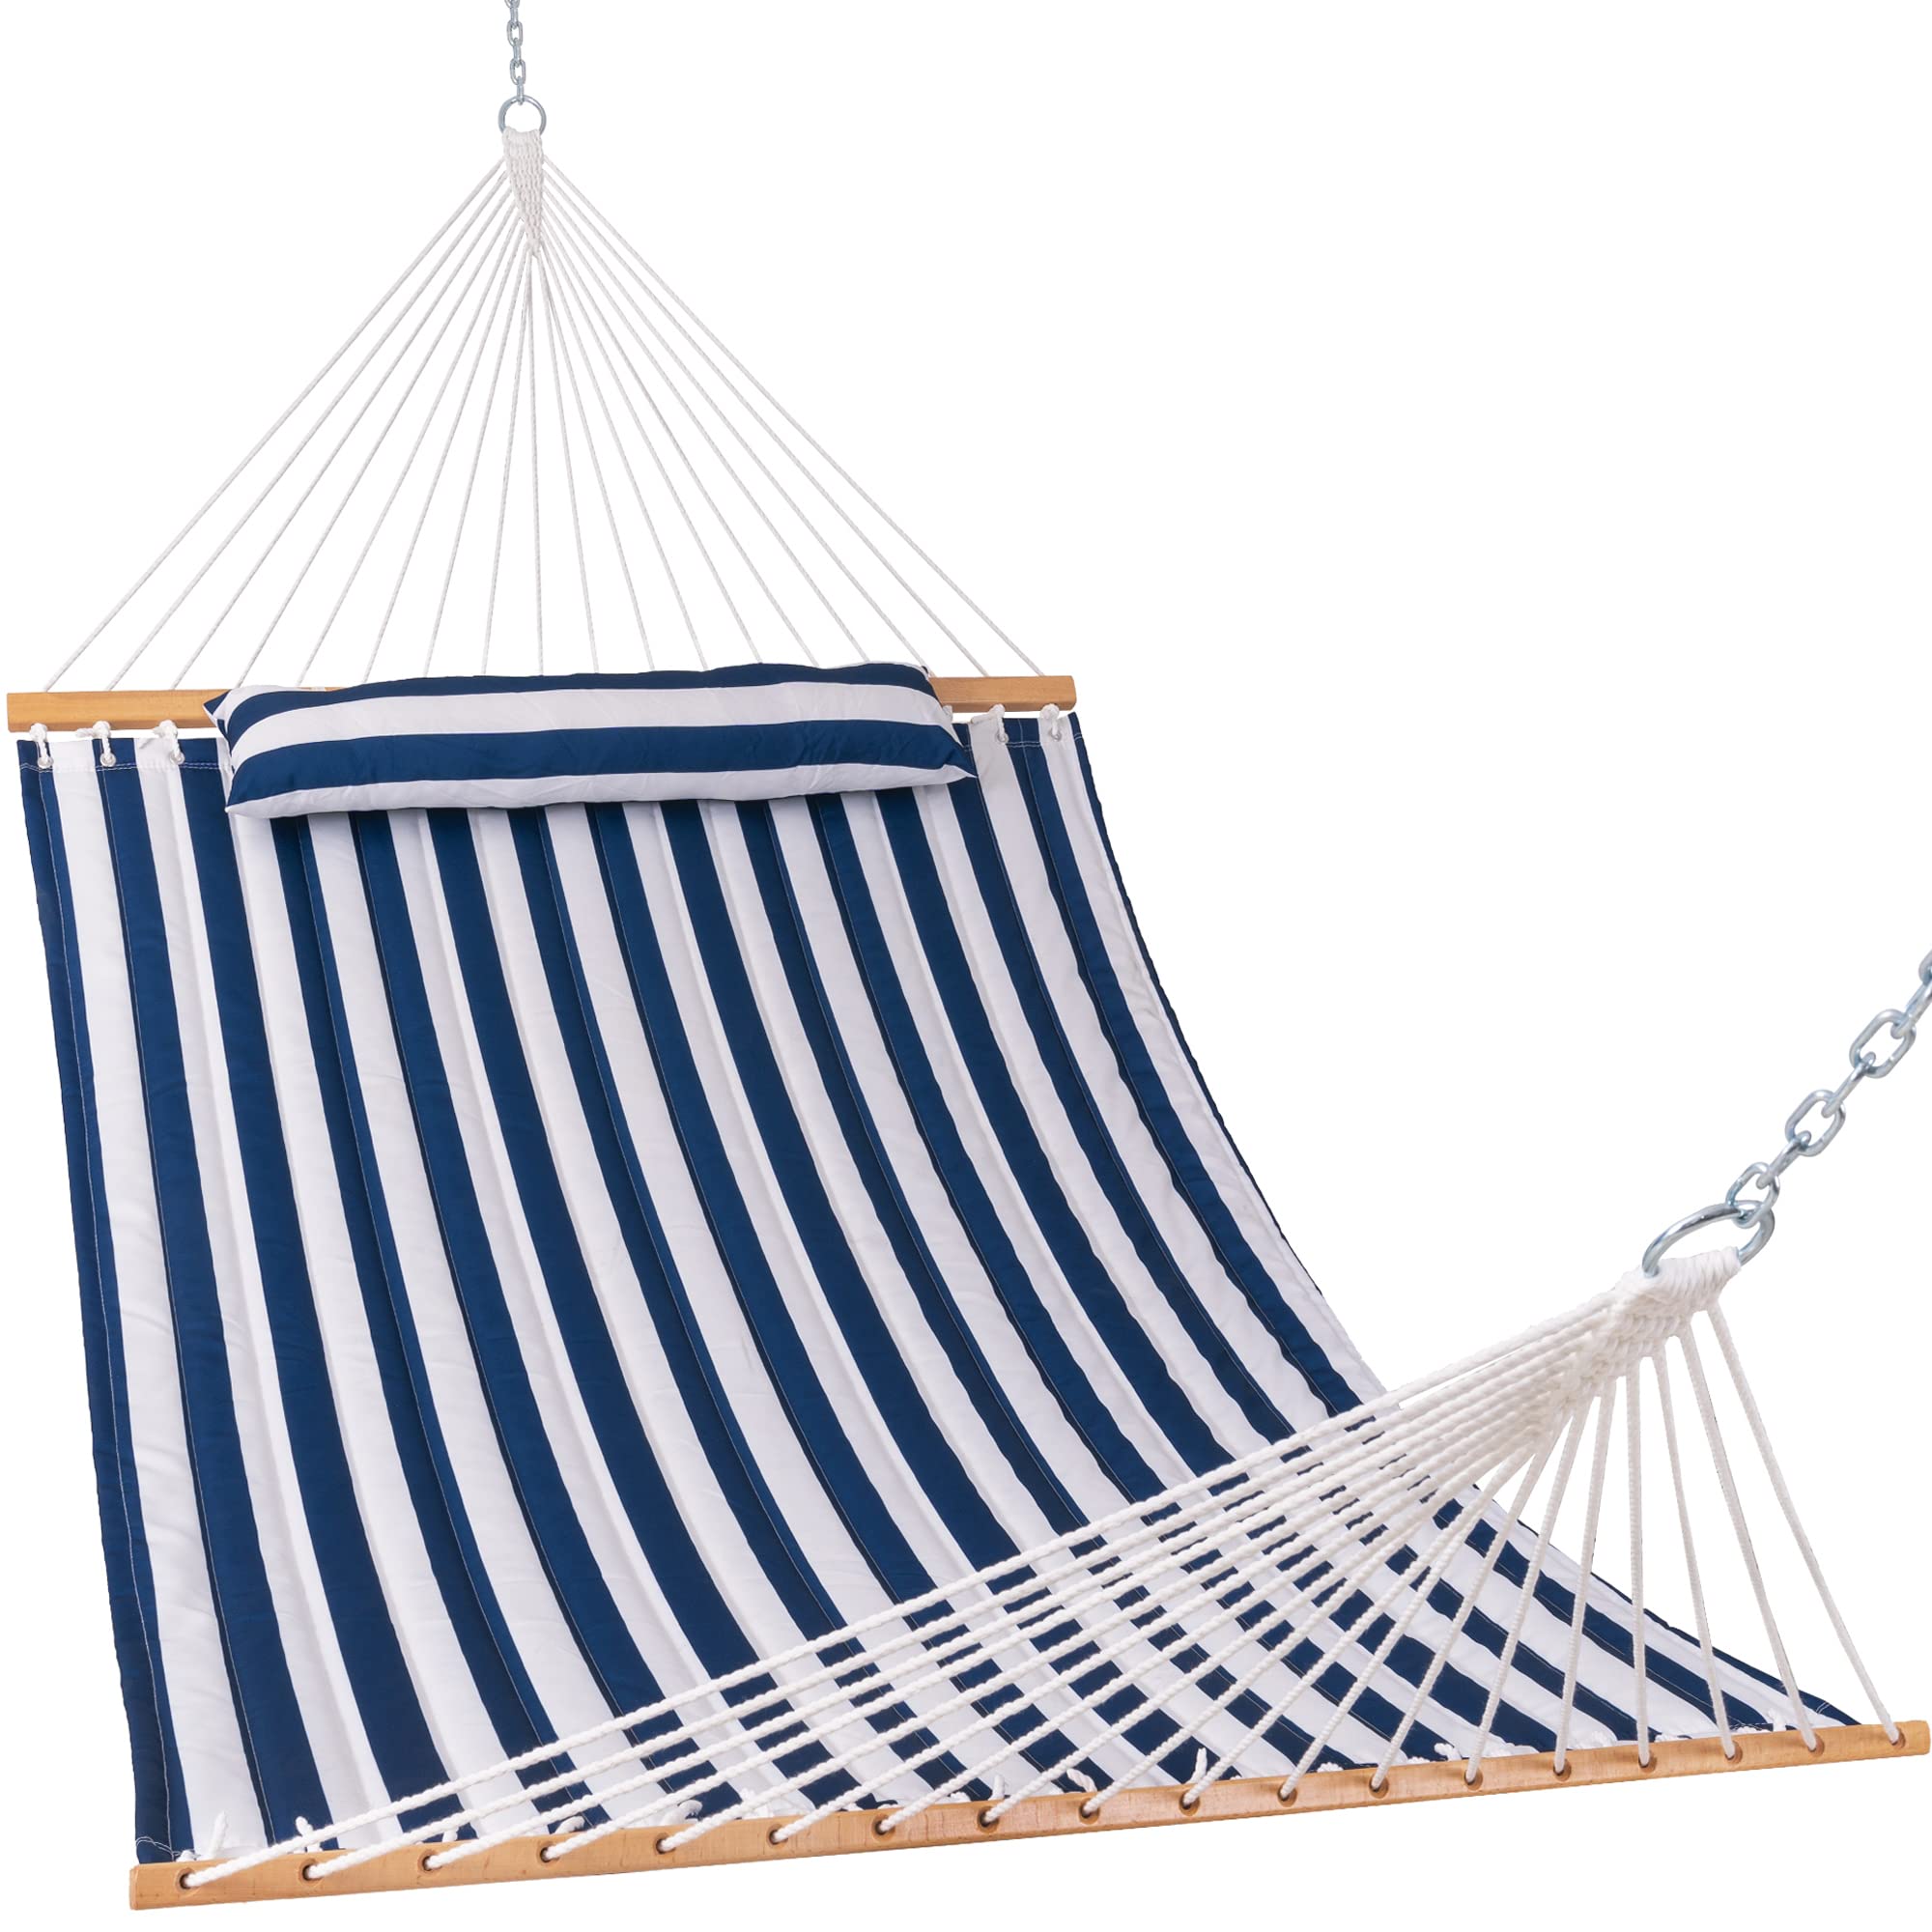 Lazy Daze Hammocks 12 FT Quilted Hammock with Spreader Bar 2-Person Double Hammock with Chains and Pillow Outdoor Hammock f